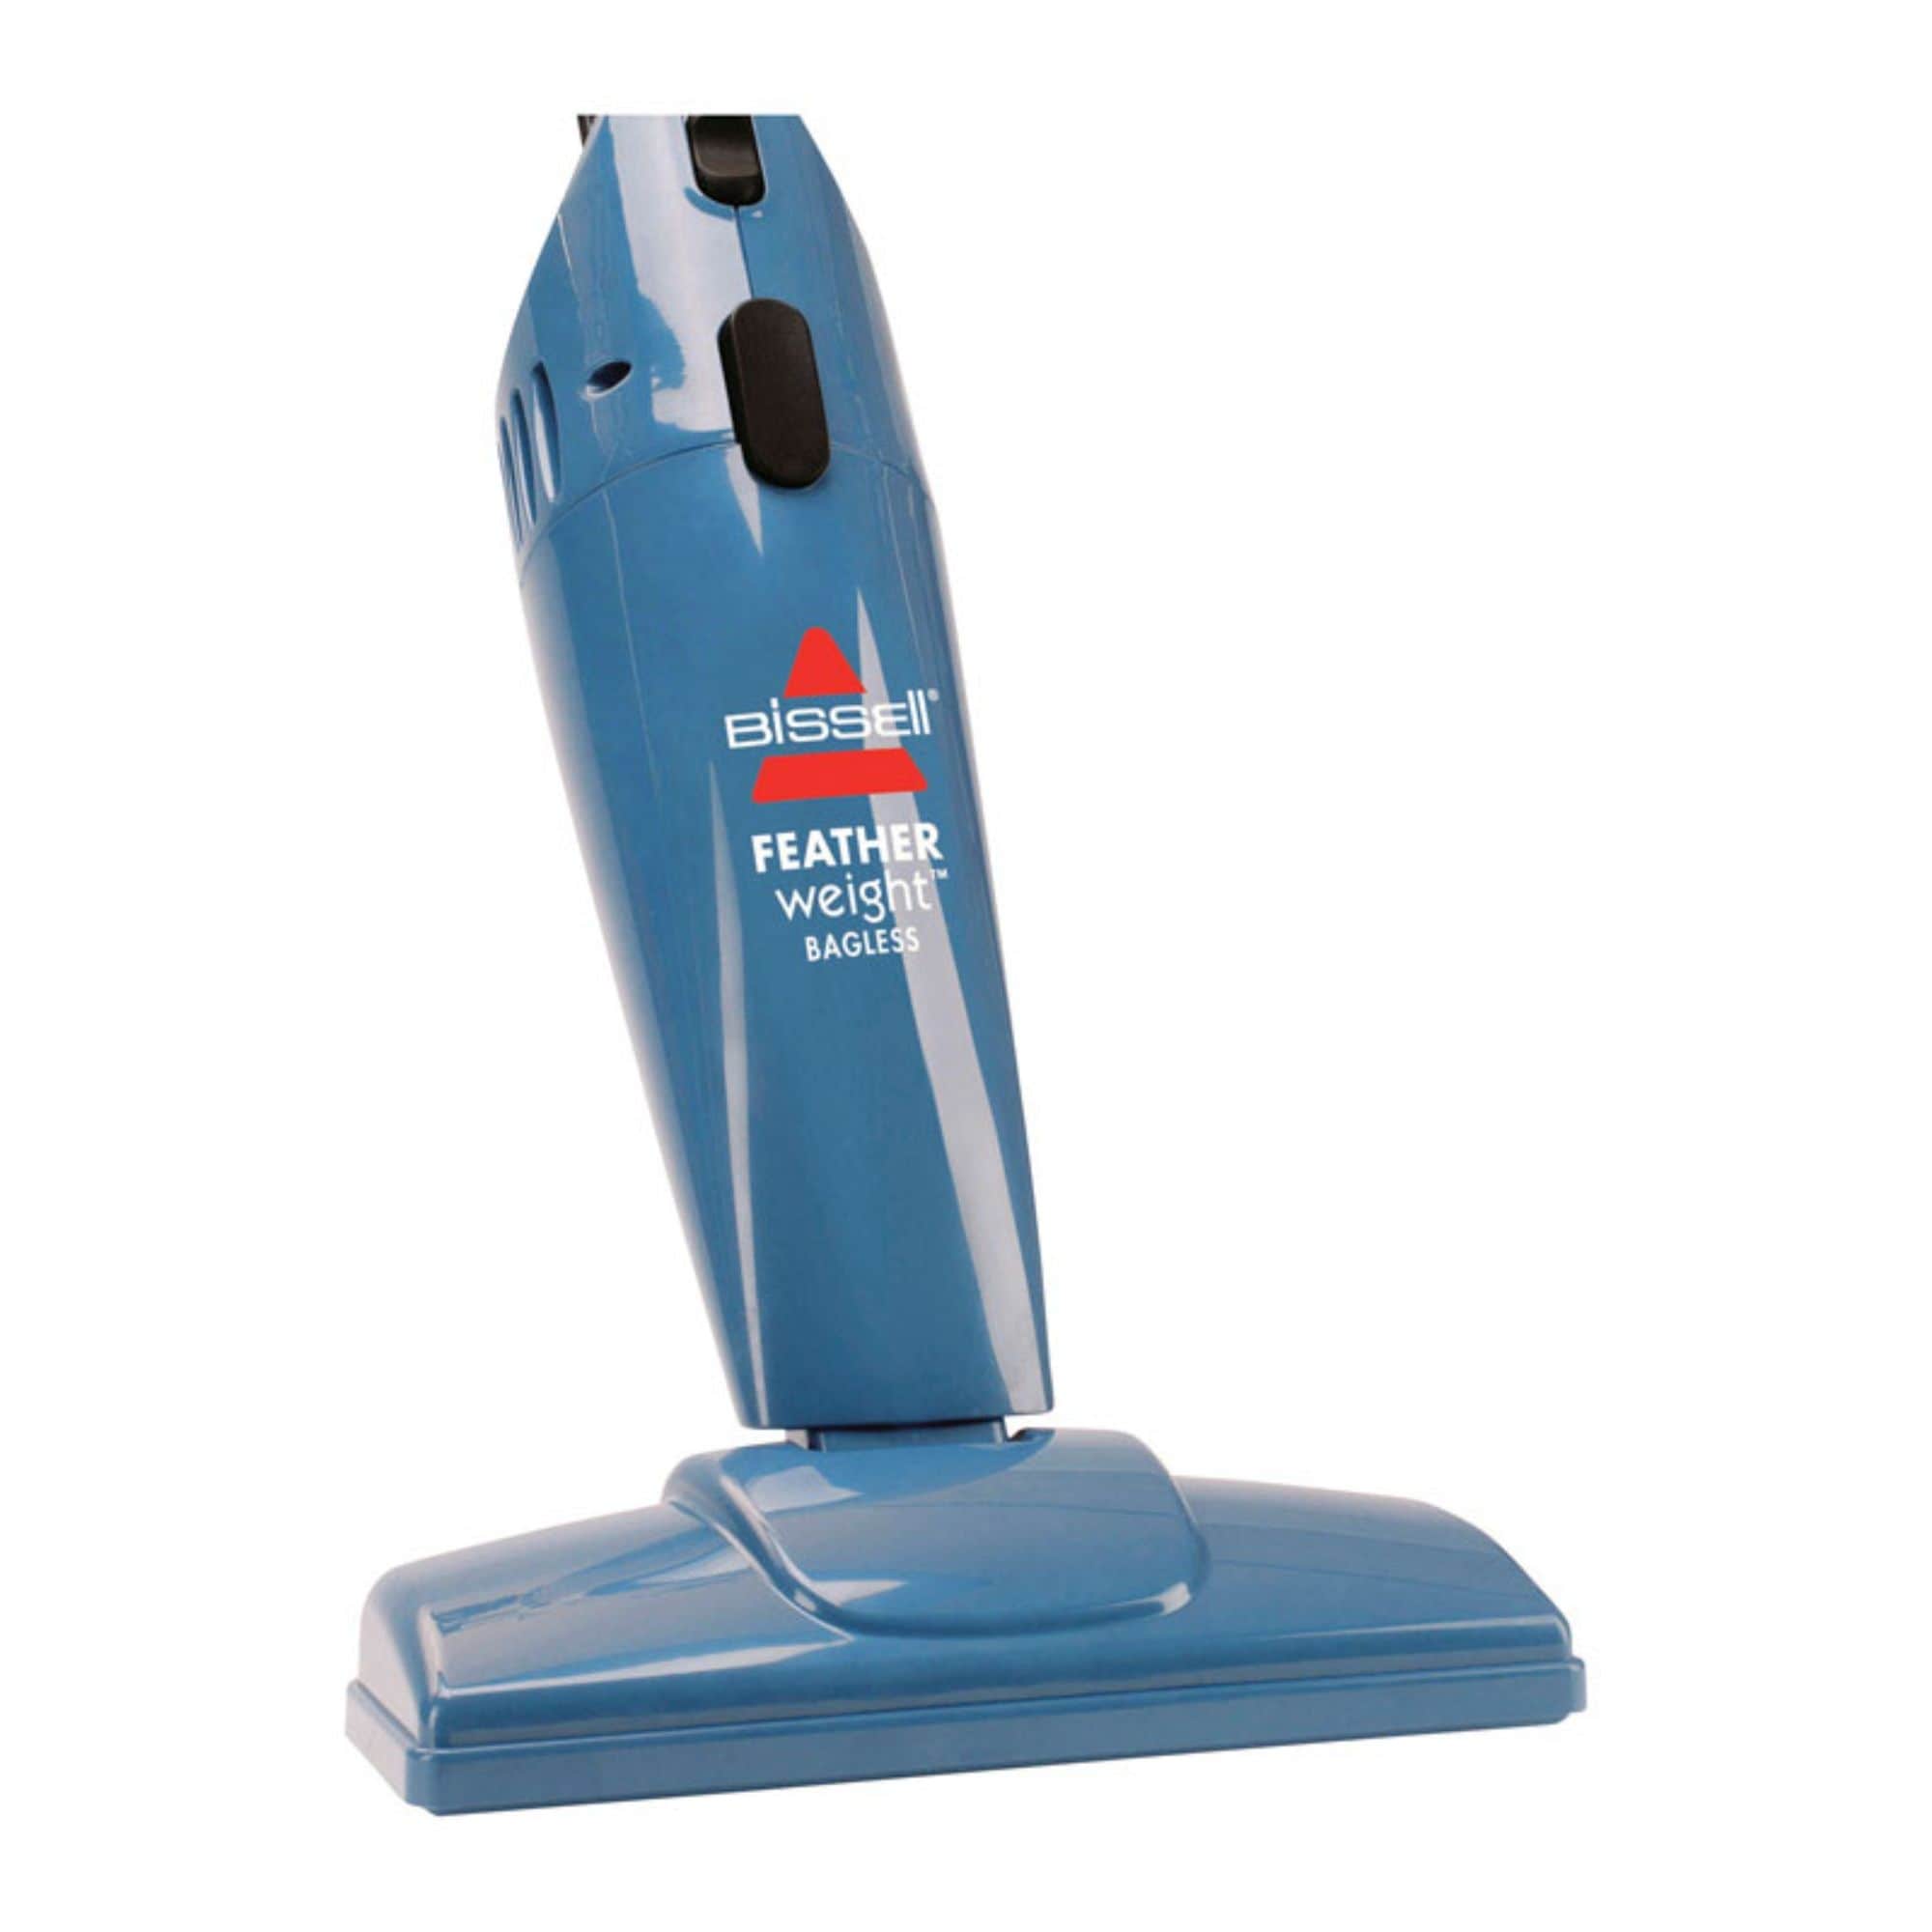 https://ak1.ostkcdn.com/images/products/is/images/direct/c545649987502f8aab91fe3cca3052cb5779fe0f/Bissell-FeatherWeight-Bagless-Stick-Hand-Vacuum-Blue.jpg